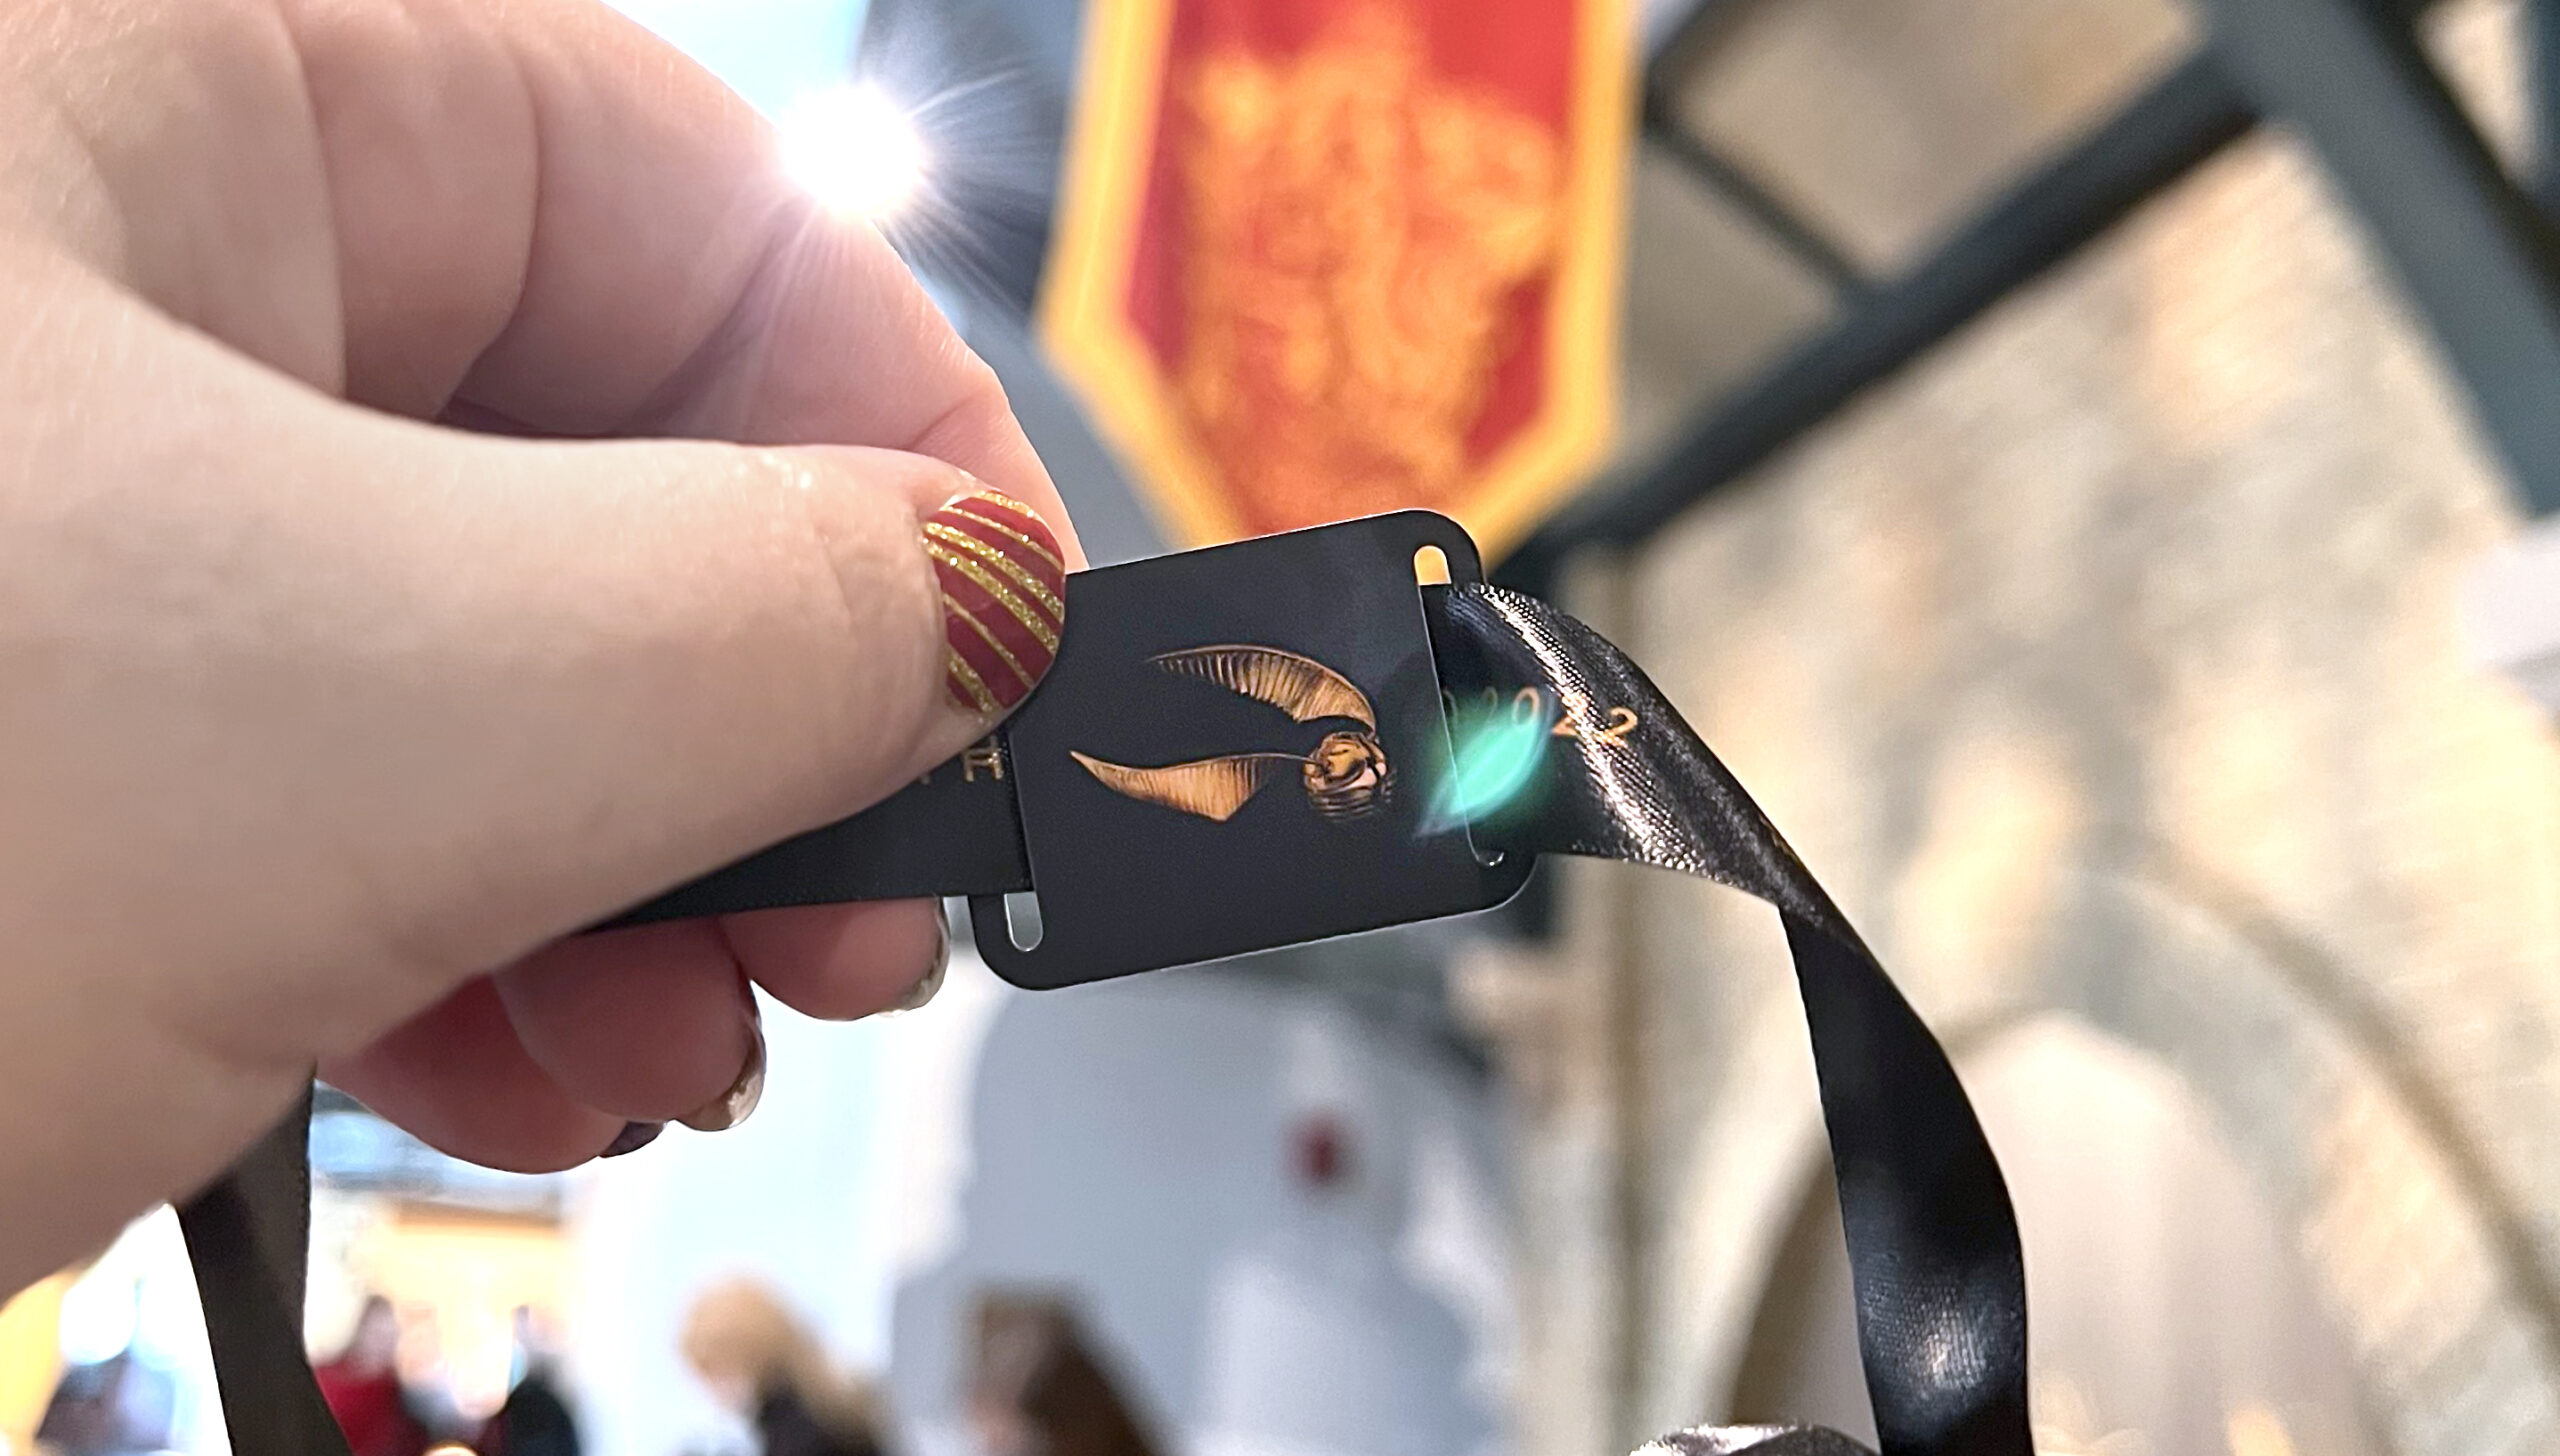 This is the wristband to get into the Harry Potter Exhibit at Franklin Institute.